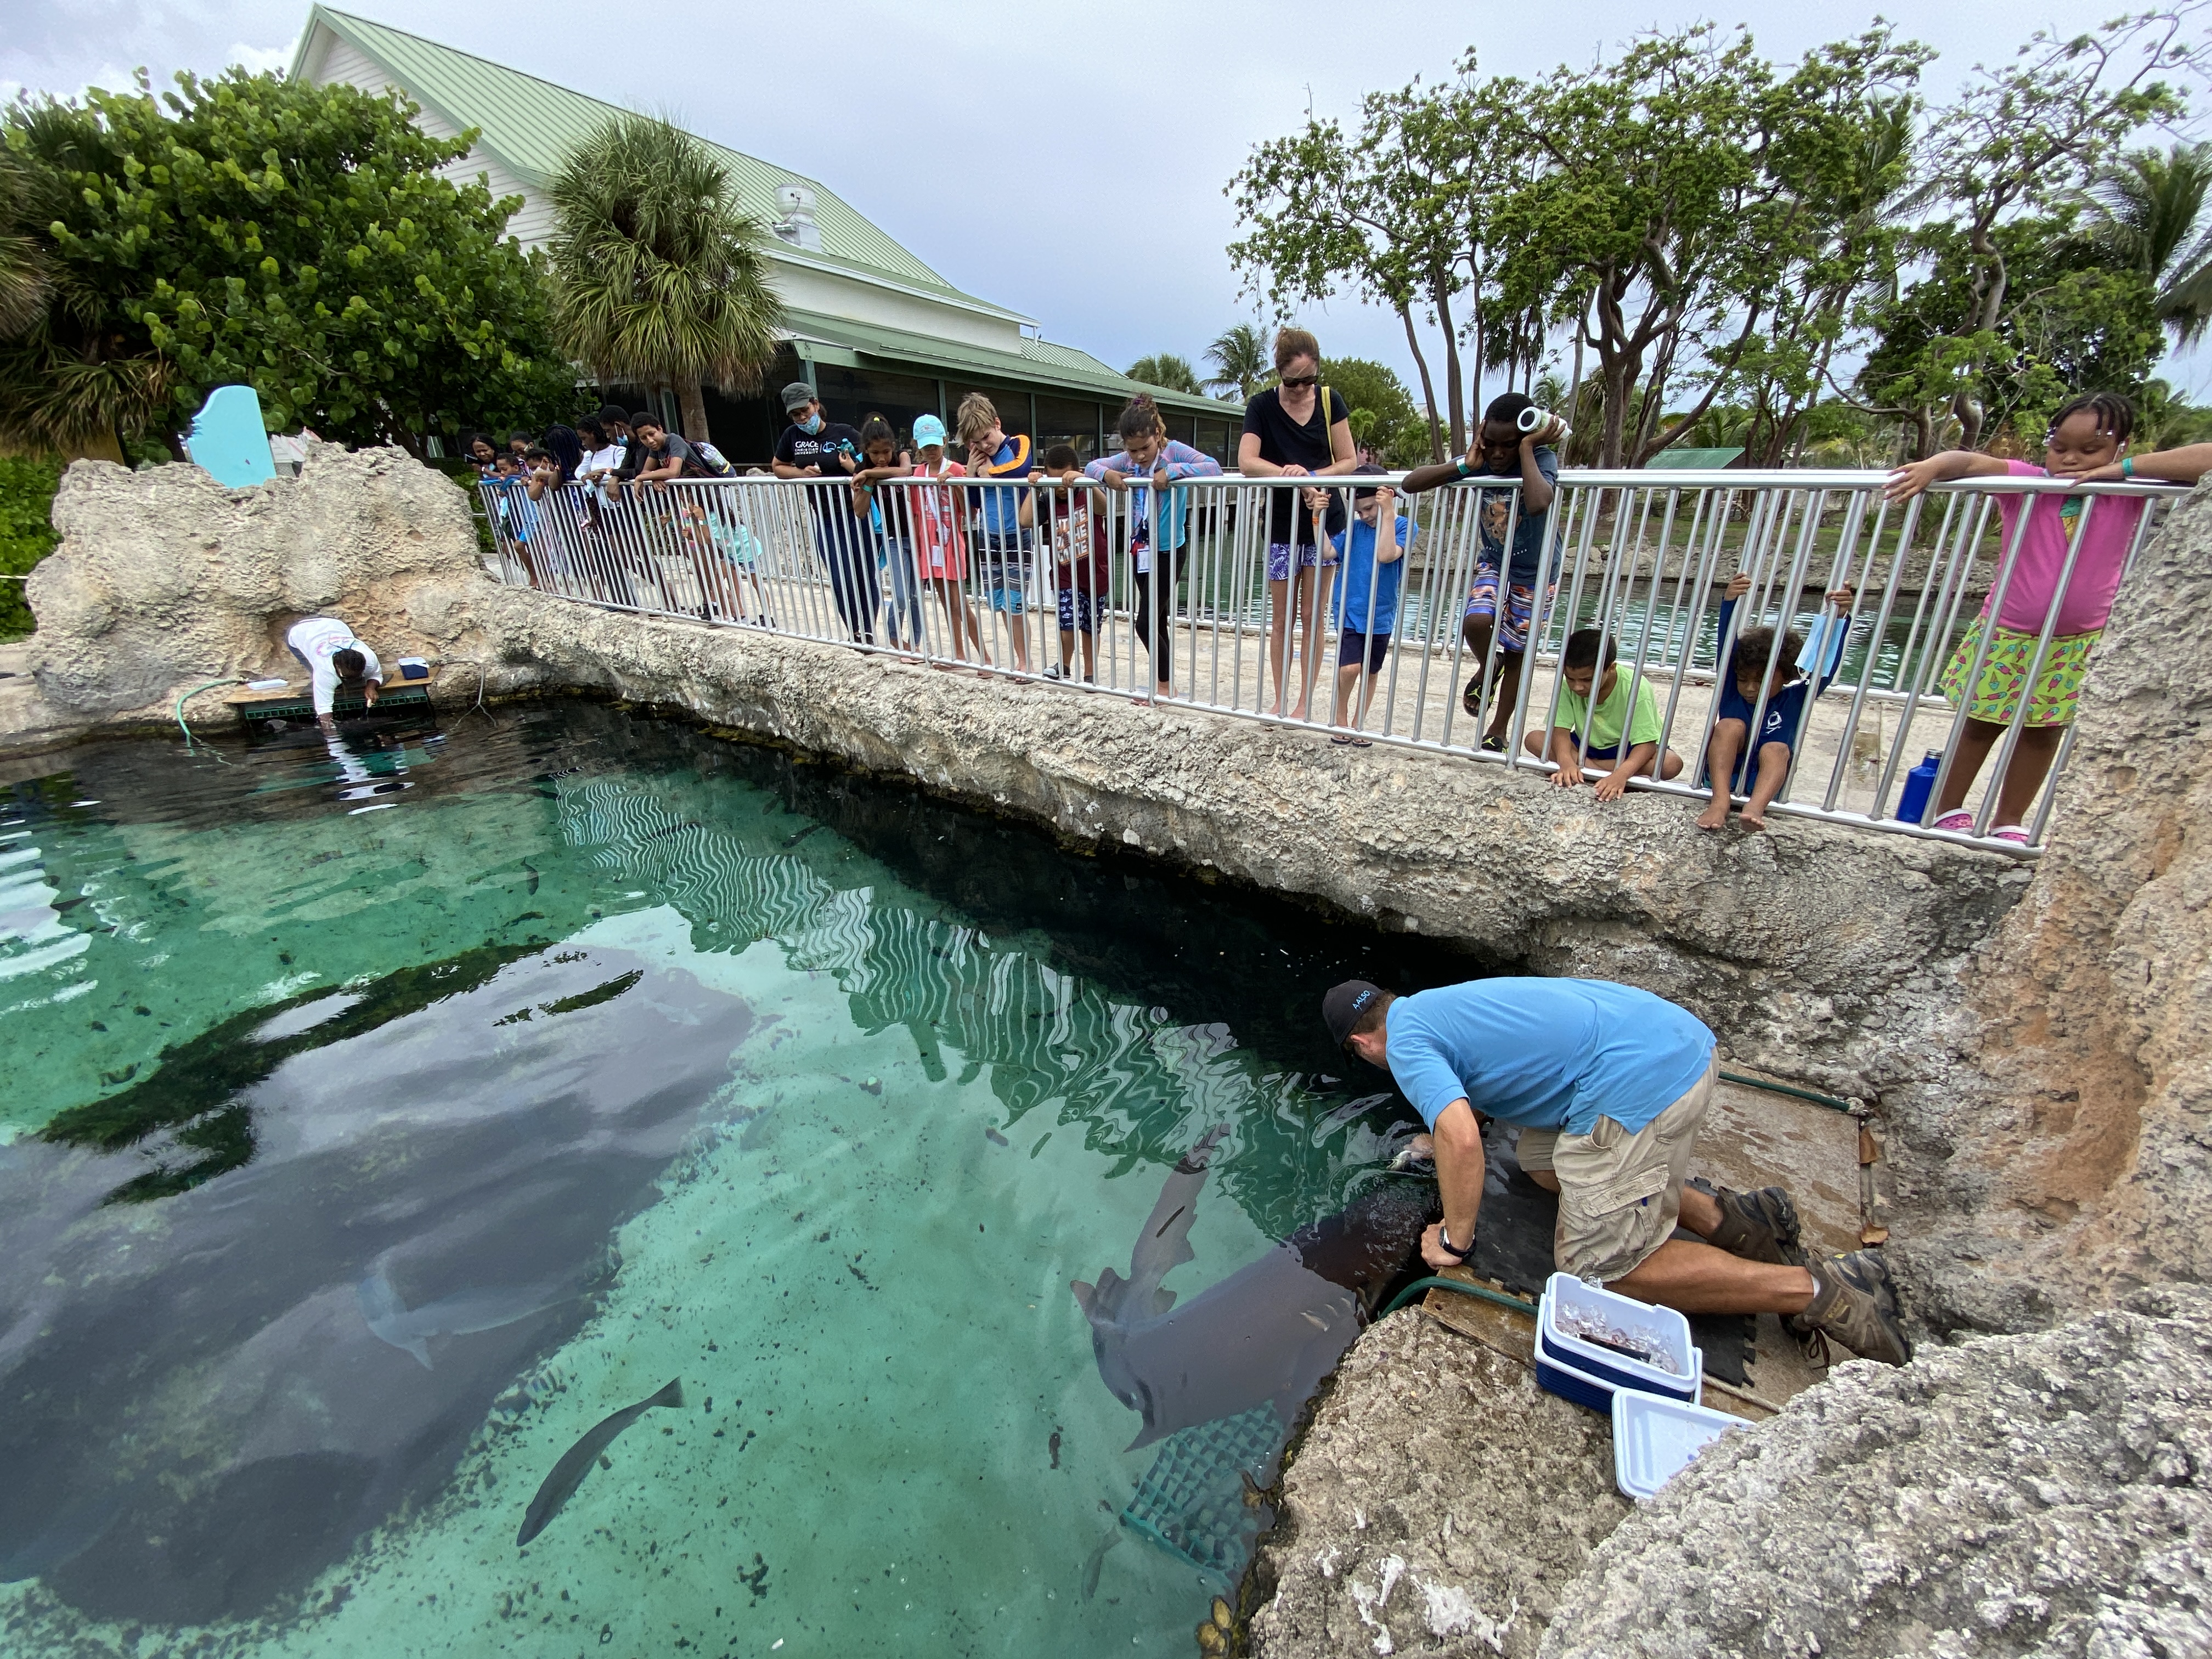 On Marine Day children will learn about sharks and participate in feeding time